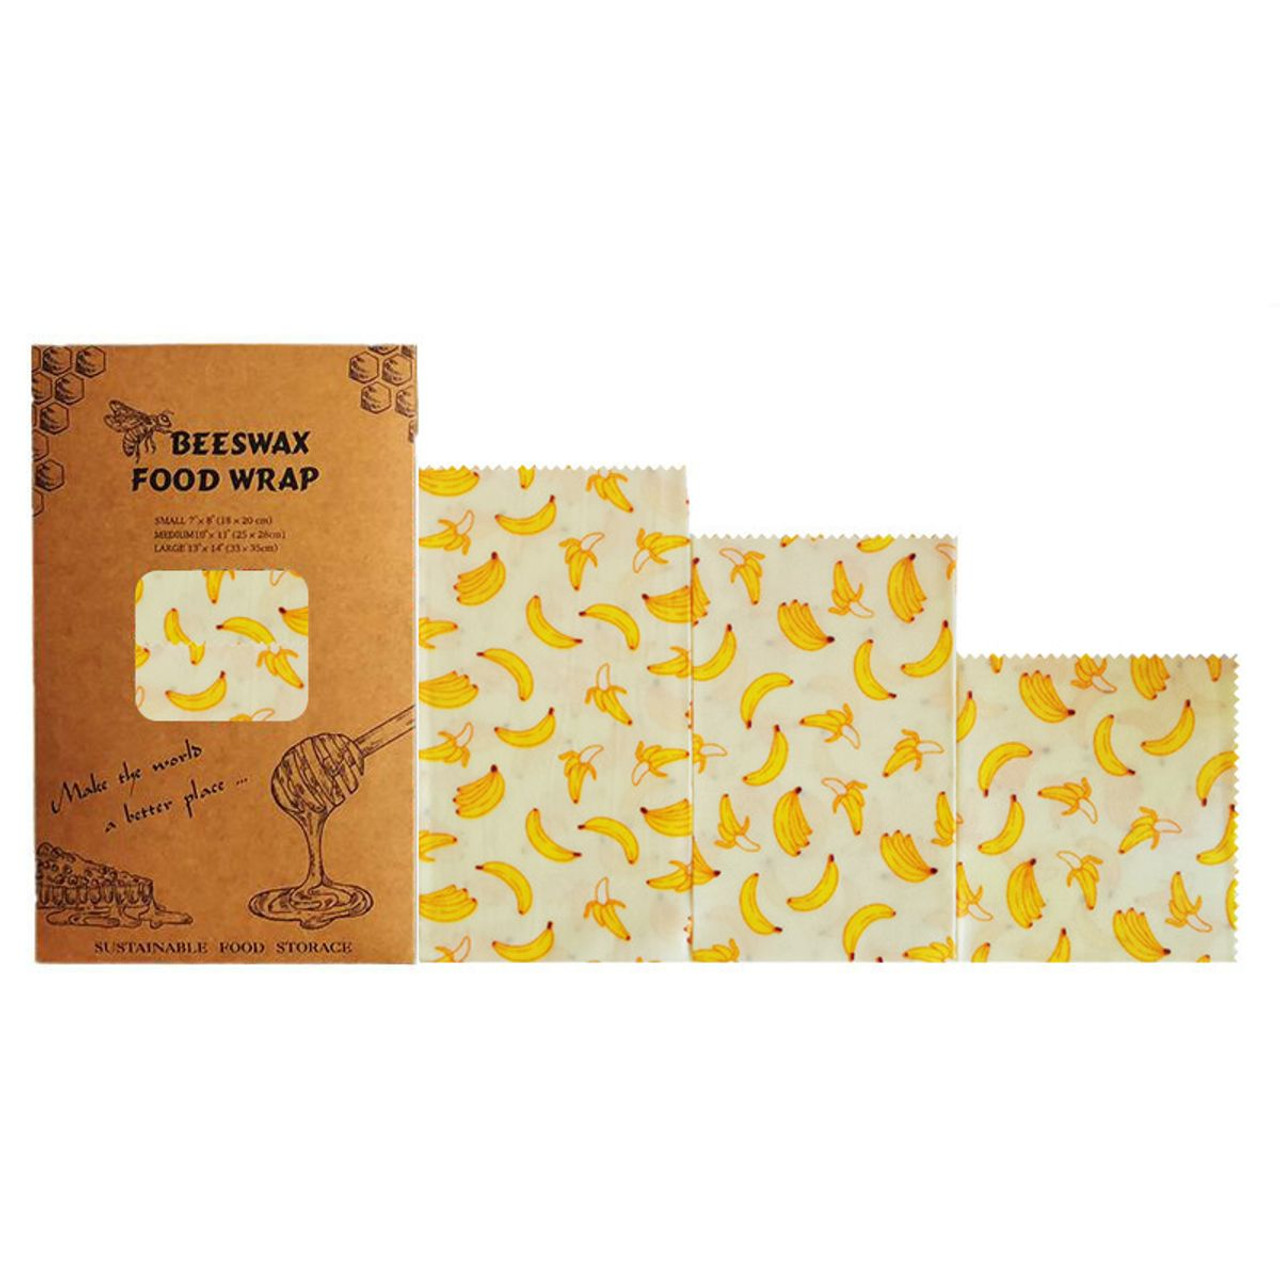 Banana Pattern - Reusable Beeswax Food Wraps, Eco Friendly Beeswax Food Wrap, Sustainable Food Storage Containers,3 Pack (S, M, L) product image